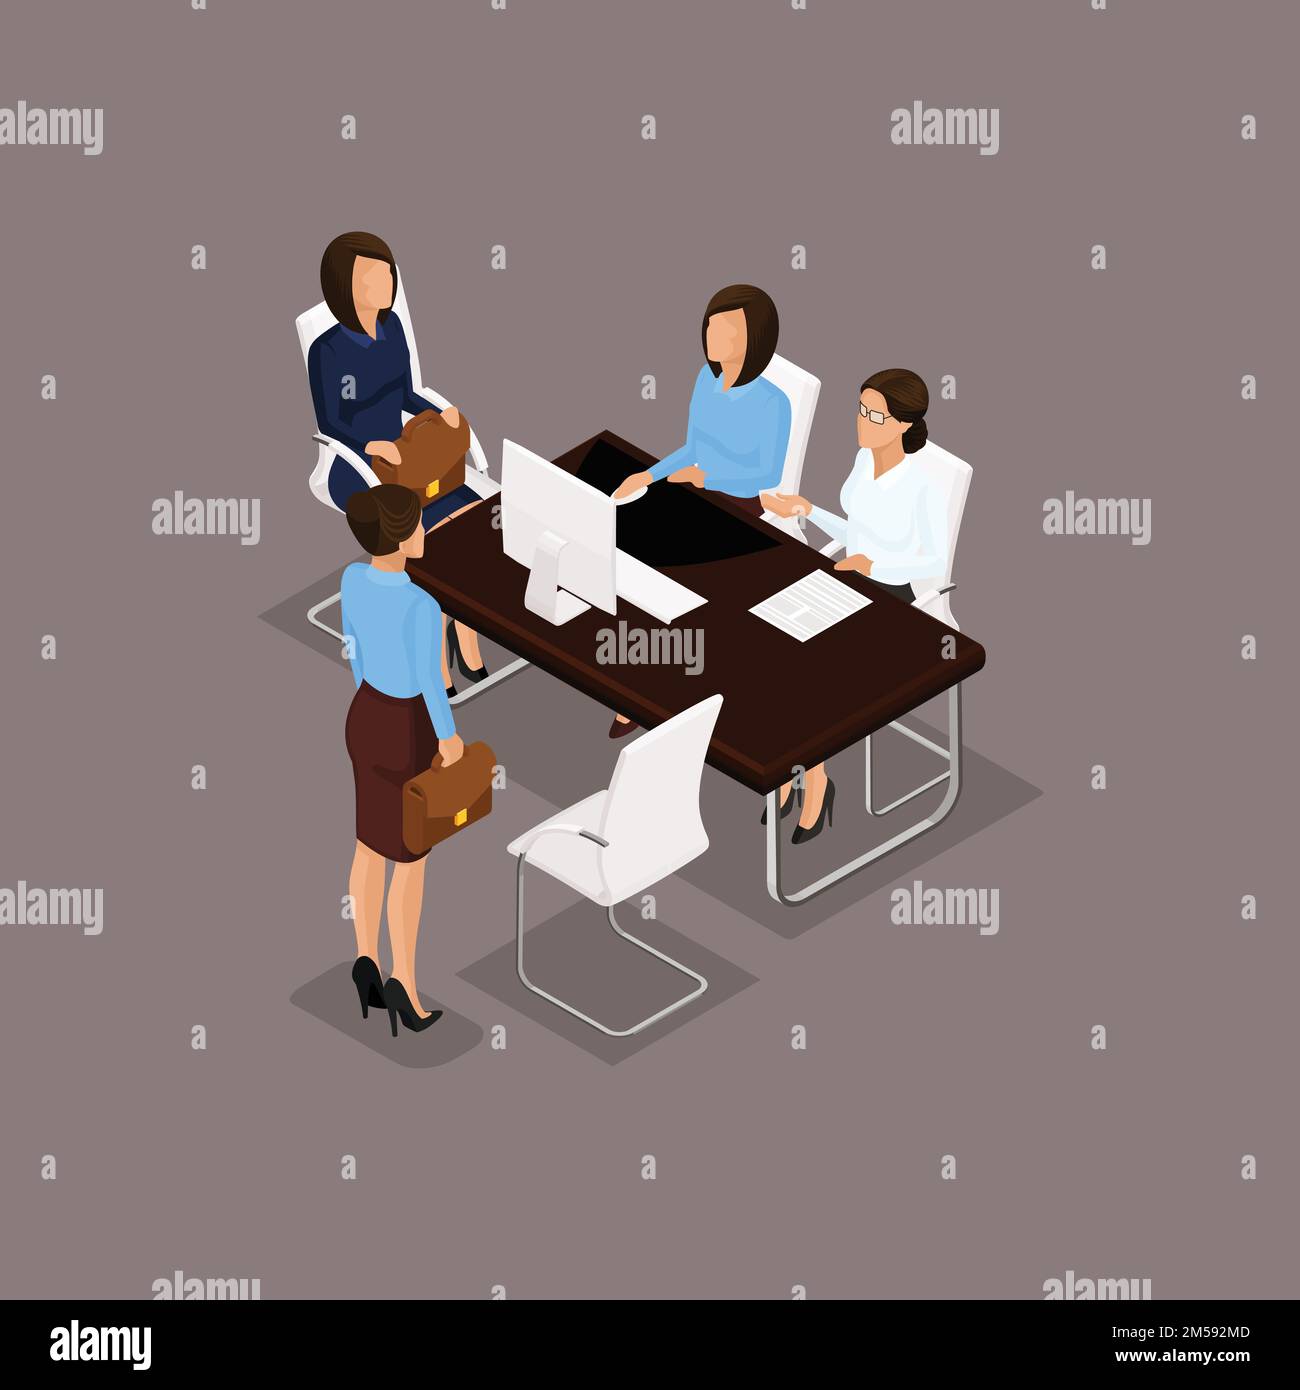 Business people isometric set of women, dialogue, brainstorming in the office isolated on dark background vector illustration. Stock Vector